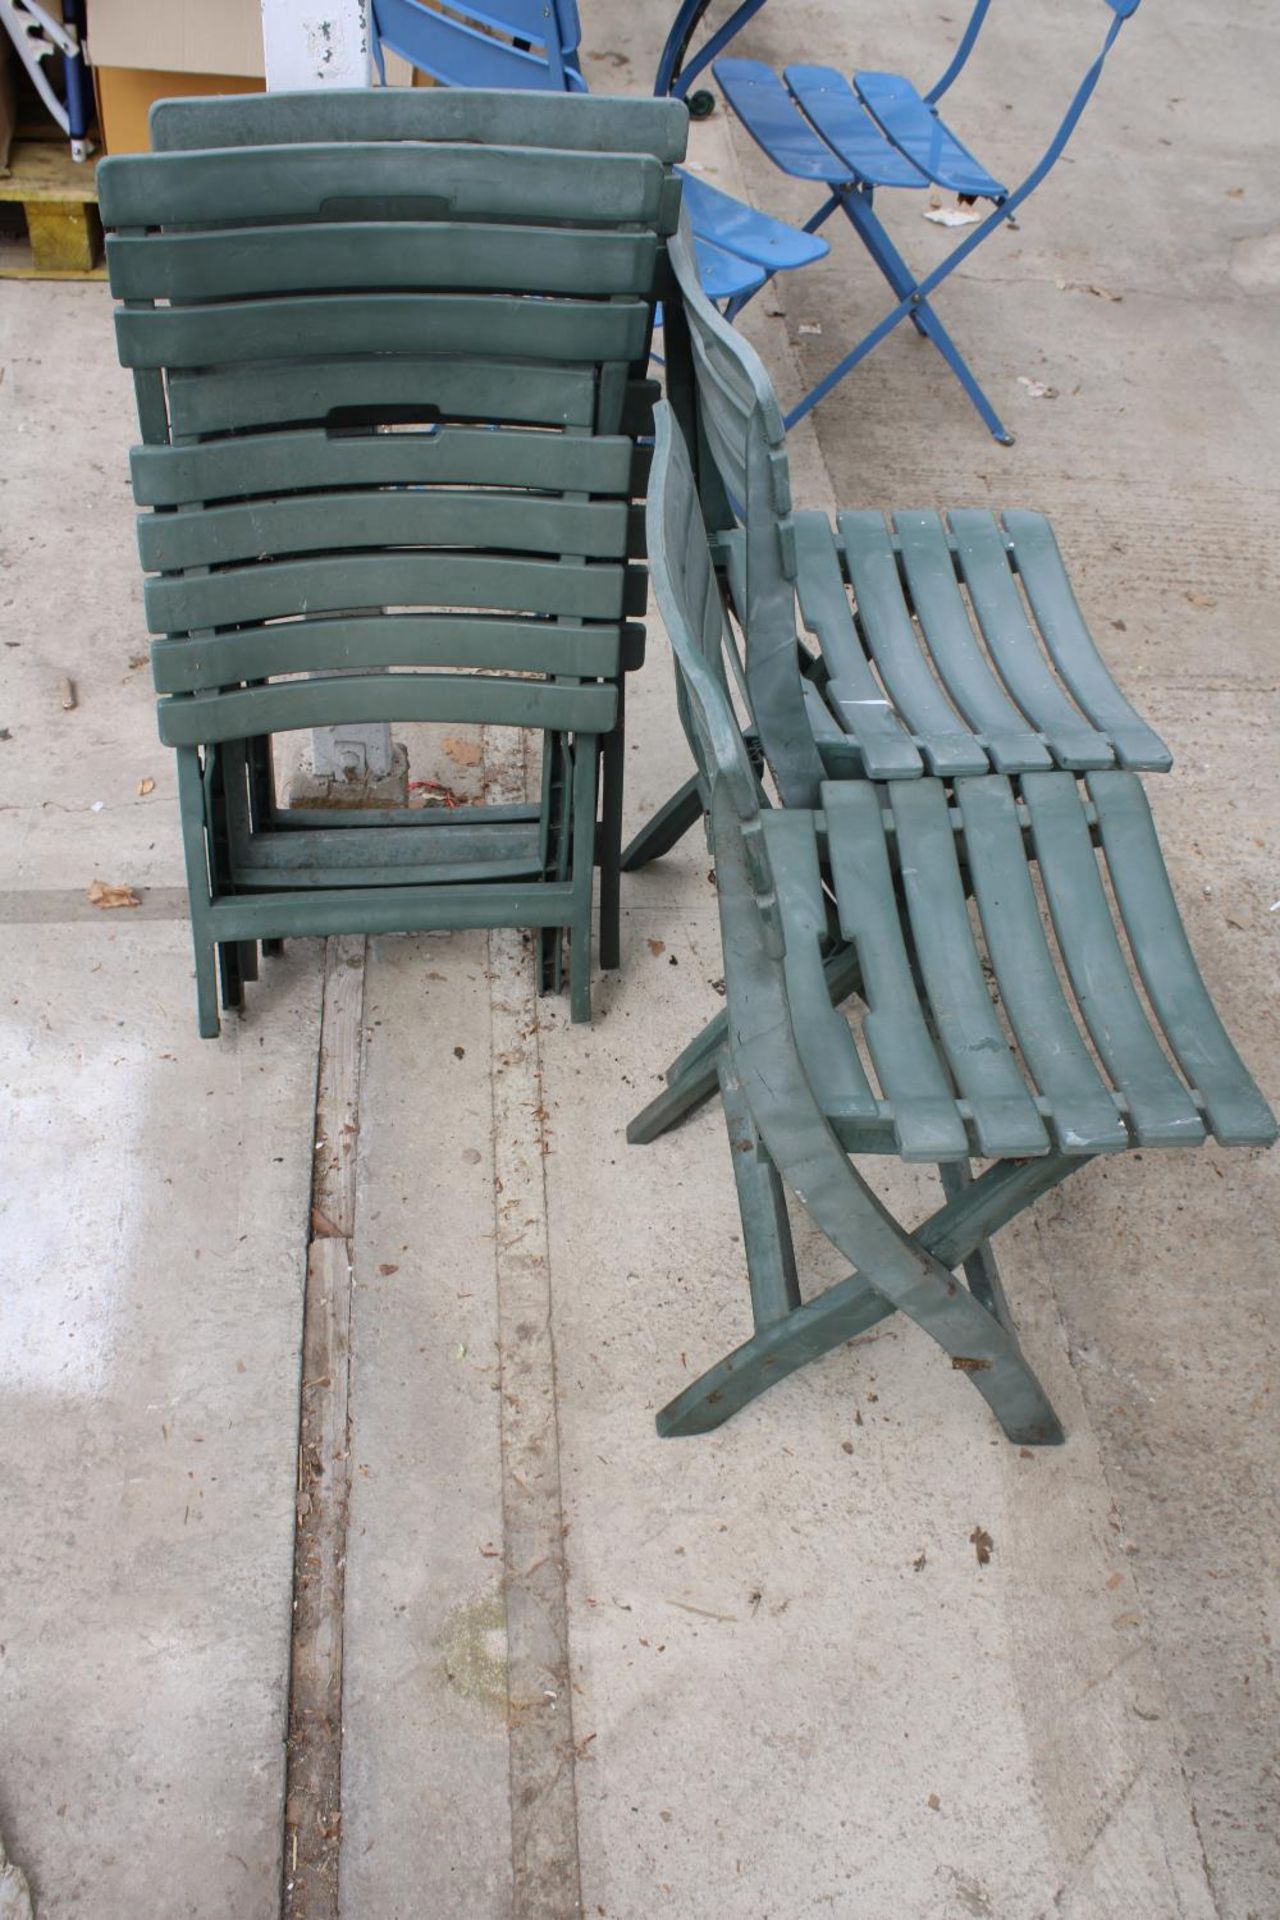 A SET OF FOUR PLASTIC FOLDING GARDEN CHAIRS - Image 2 of 2